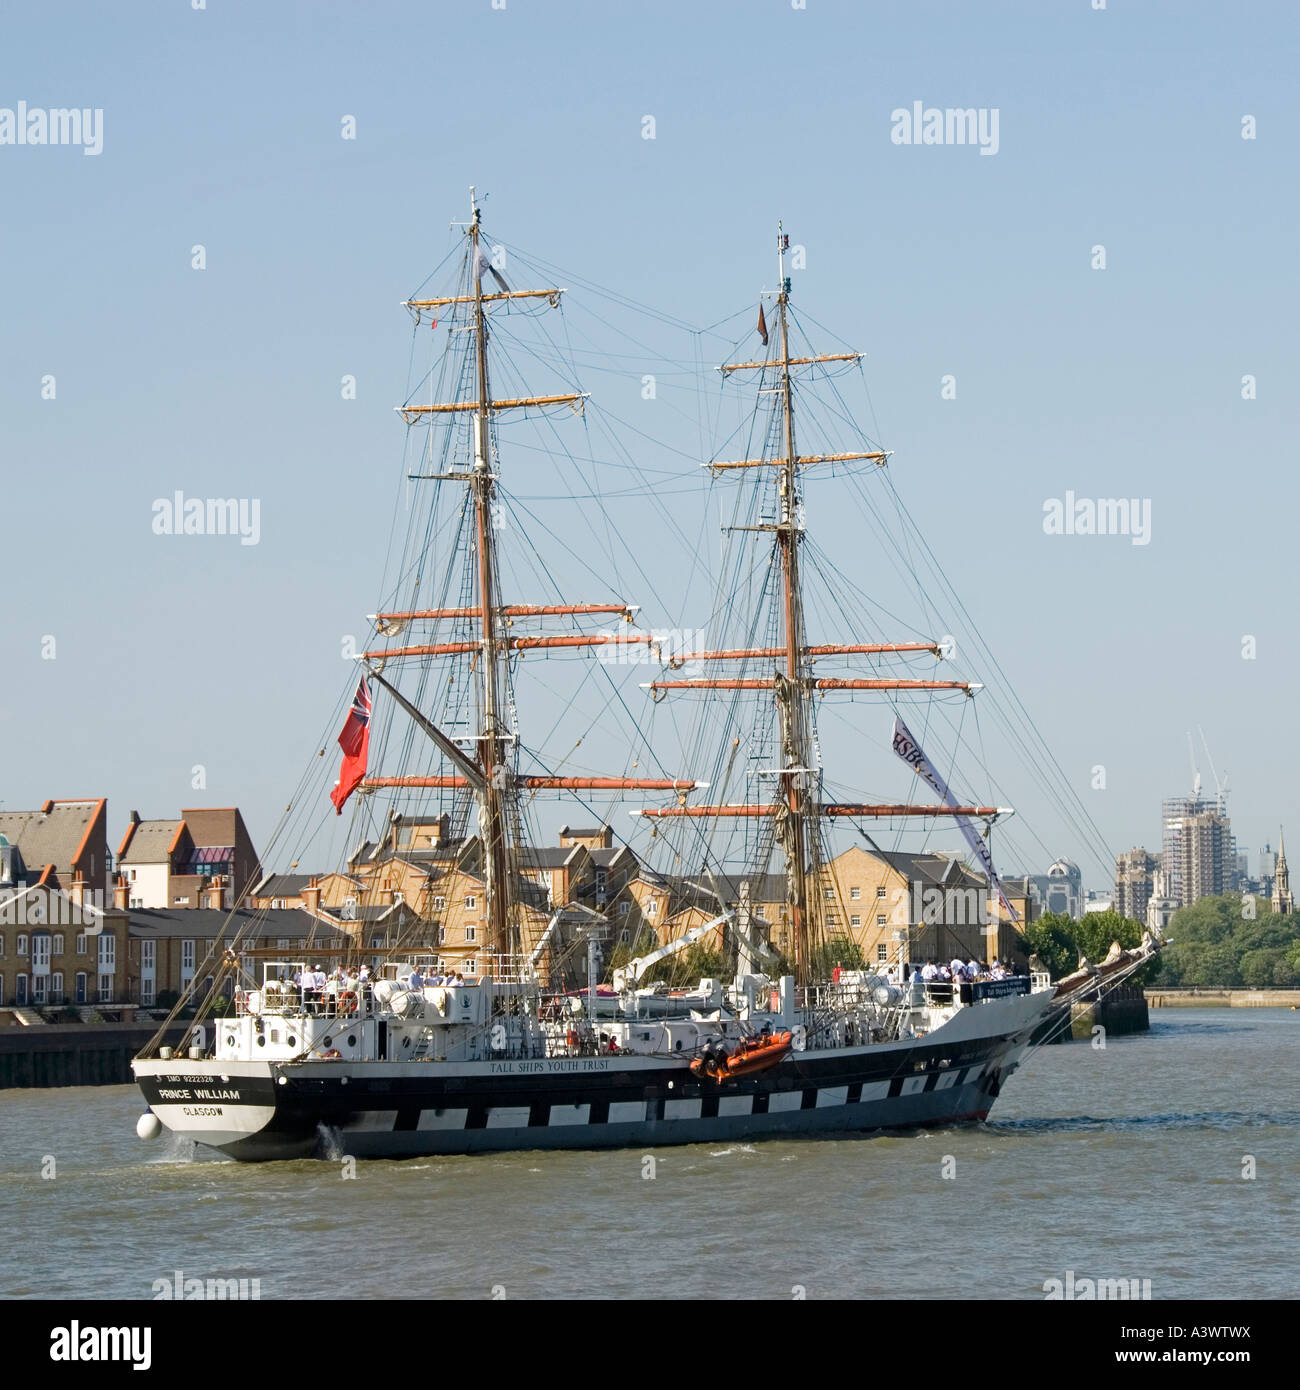 The Tall Ships Youth Trust Prince William registered in Glasgow sailing up the River Thames at Canary Wharf Stock Photo